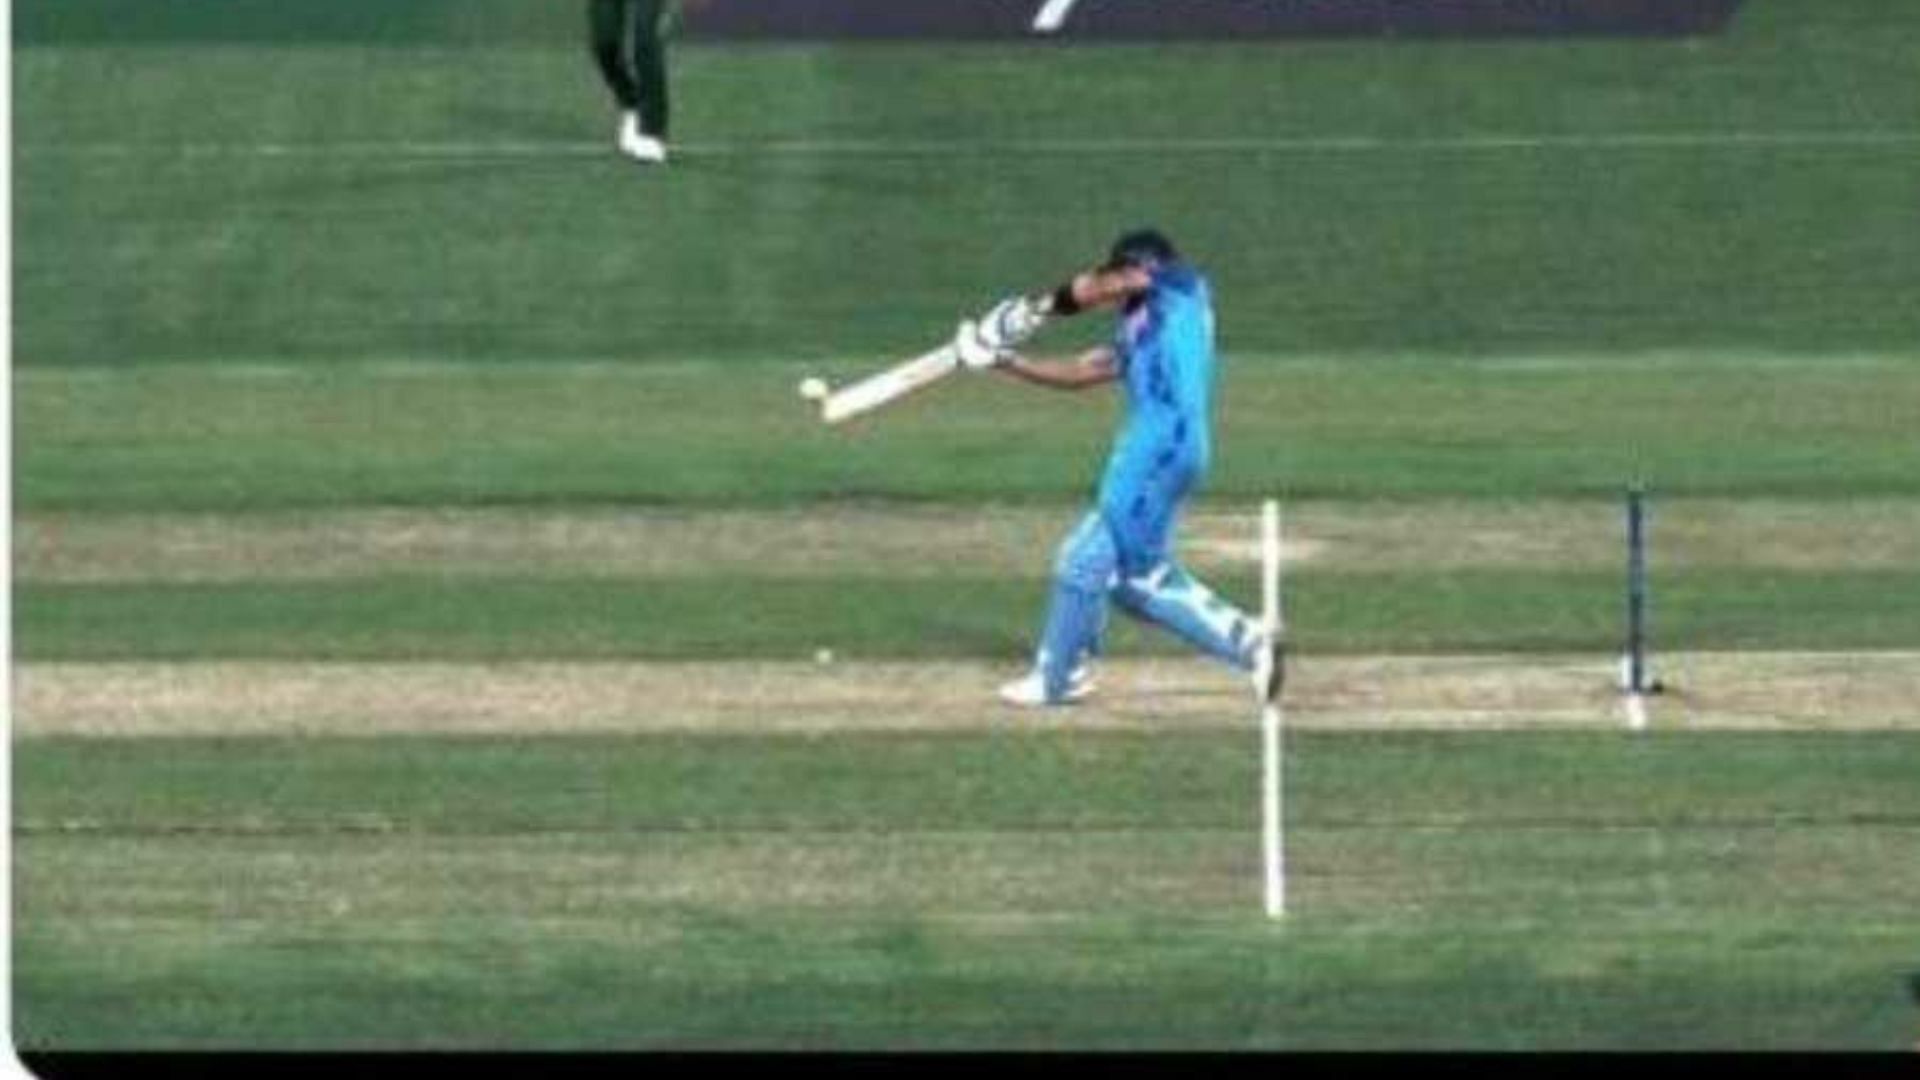 A no-ball call during the India-Pakistan T20 World Cup game led to a major controversy.